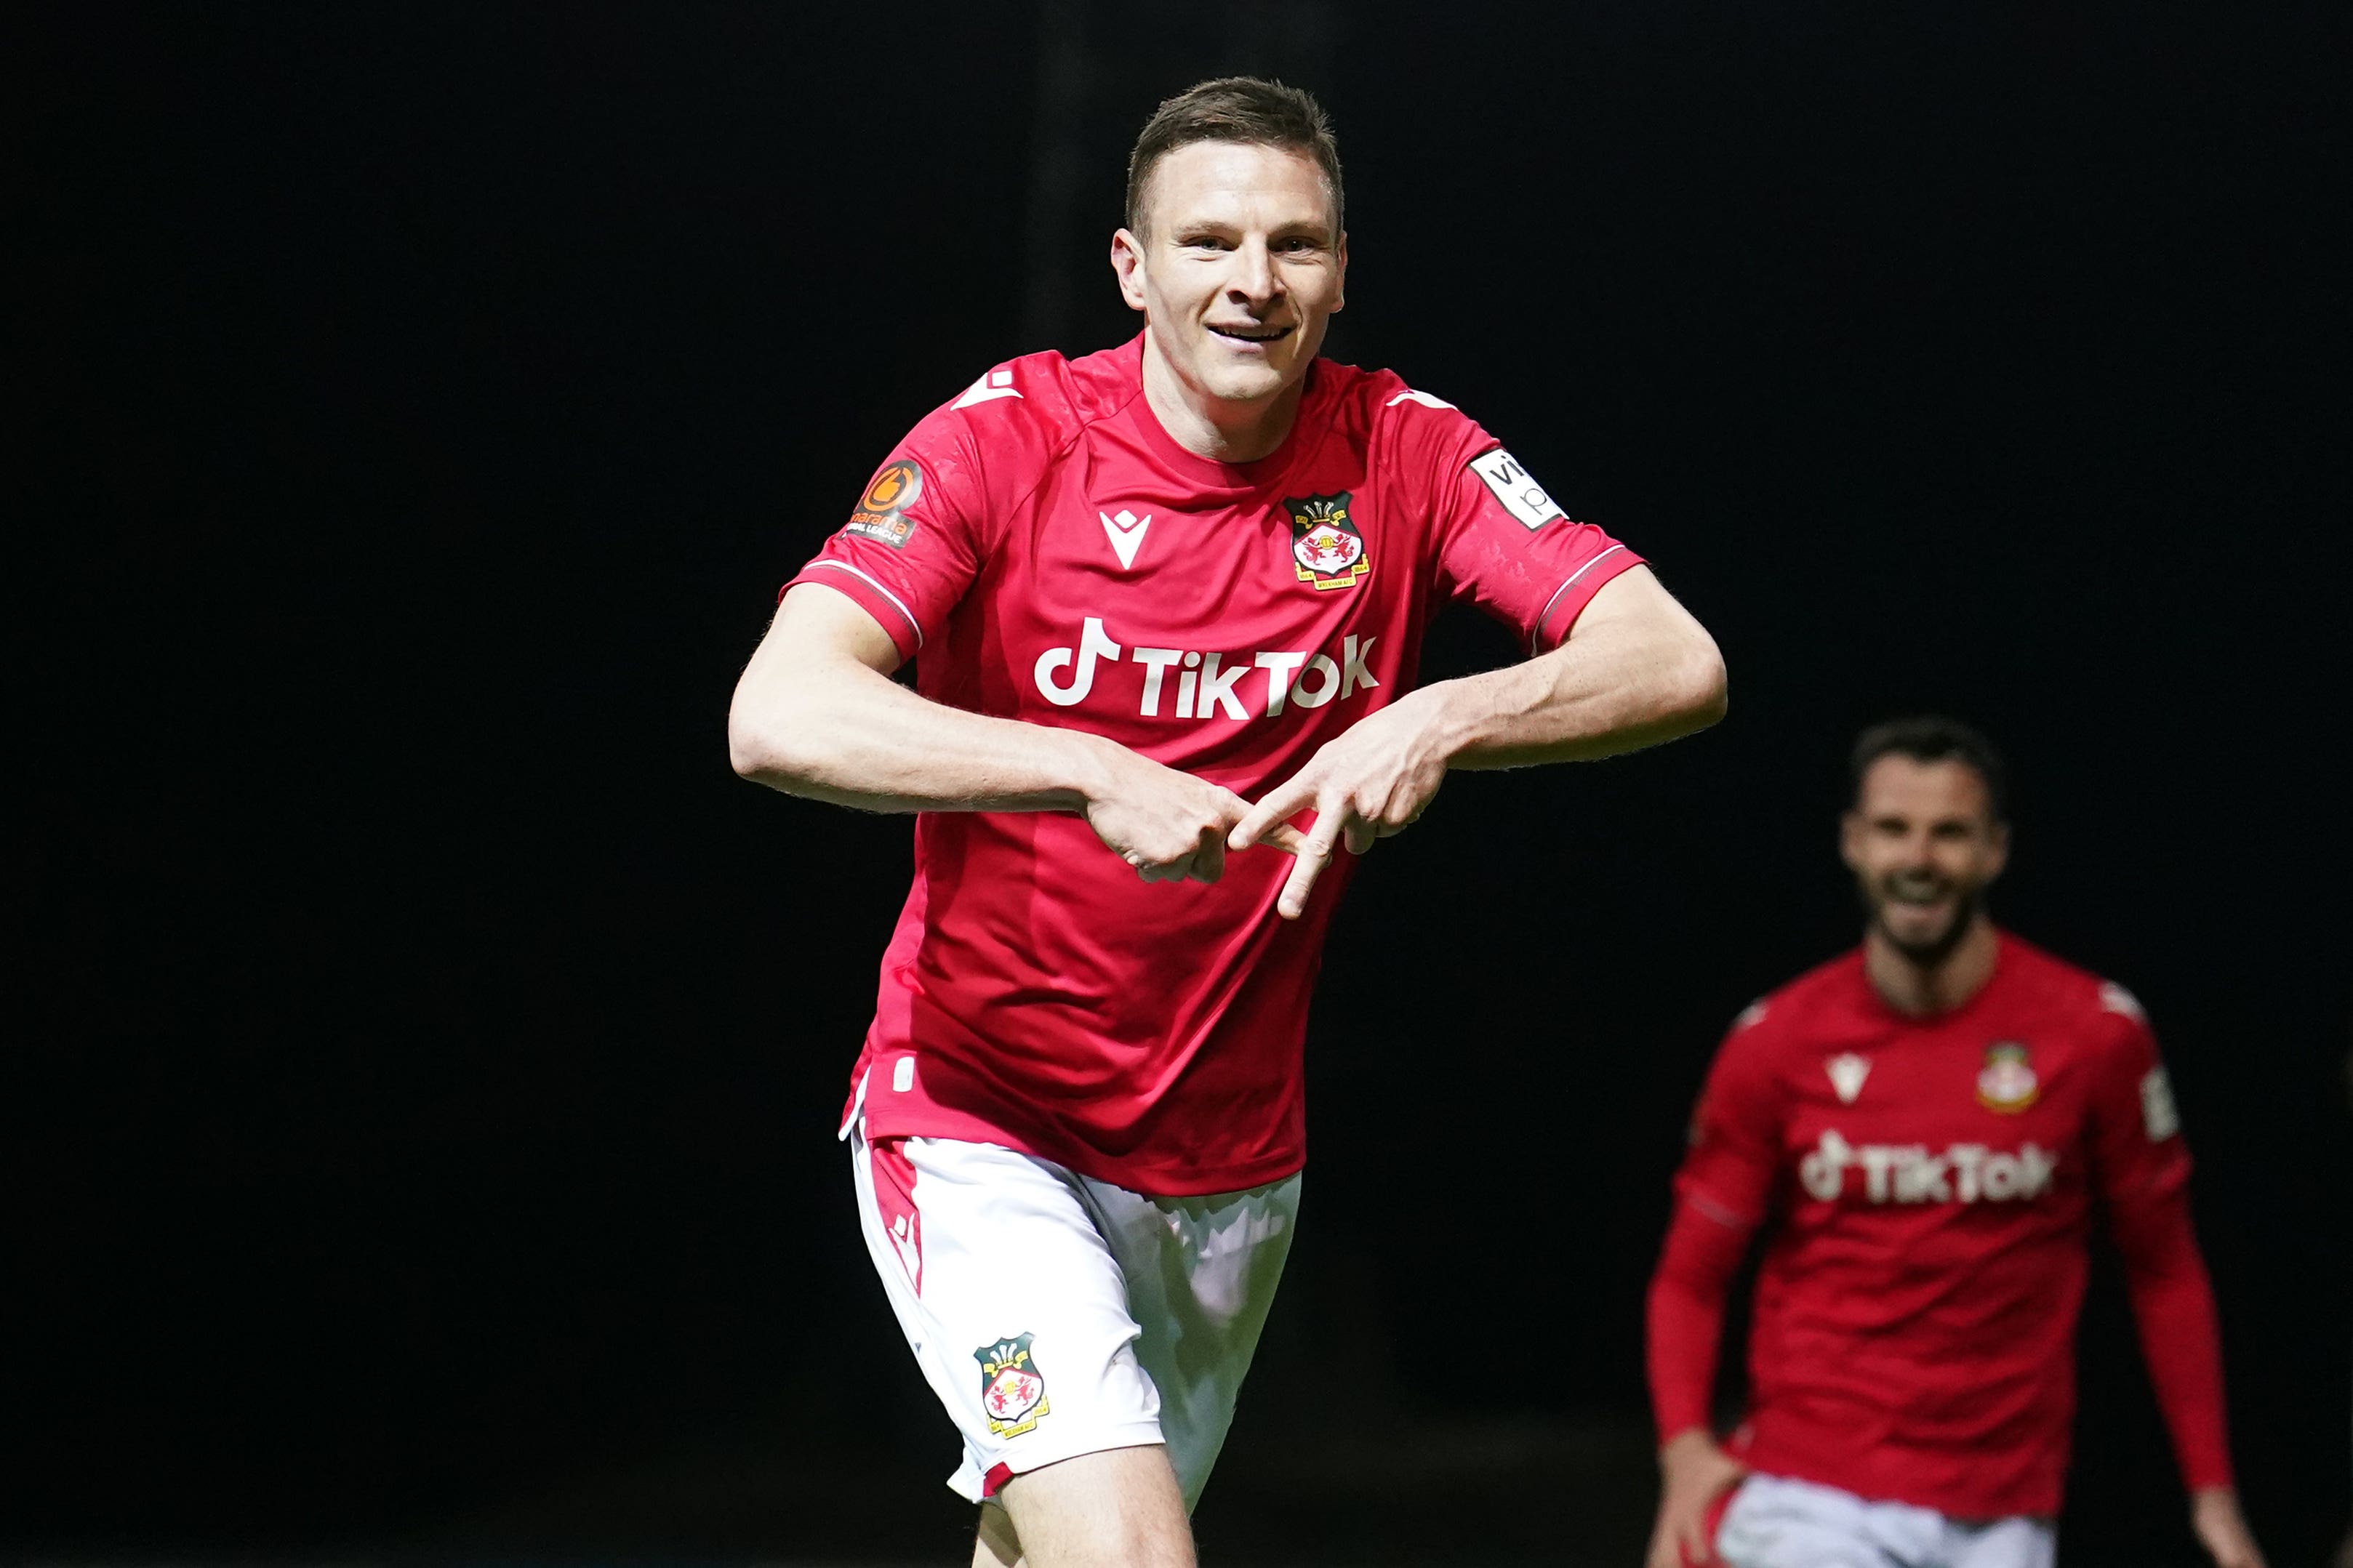 Mullin proved his class at Wrexham